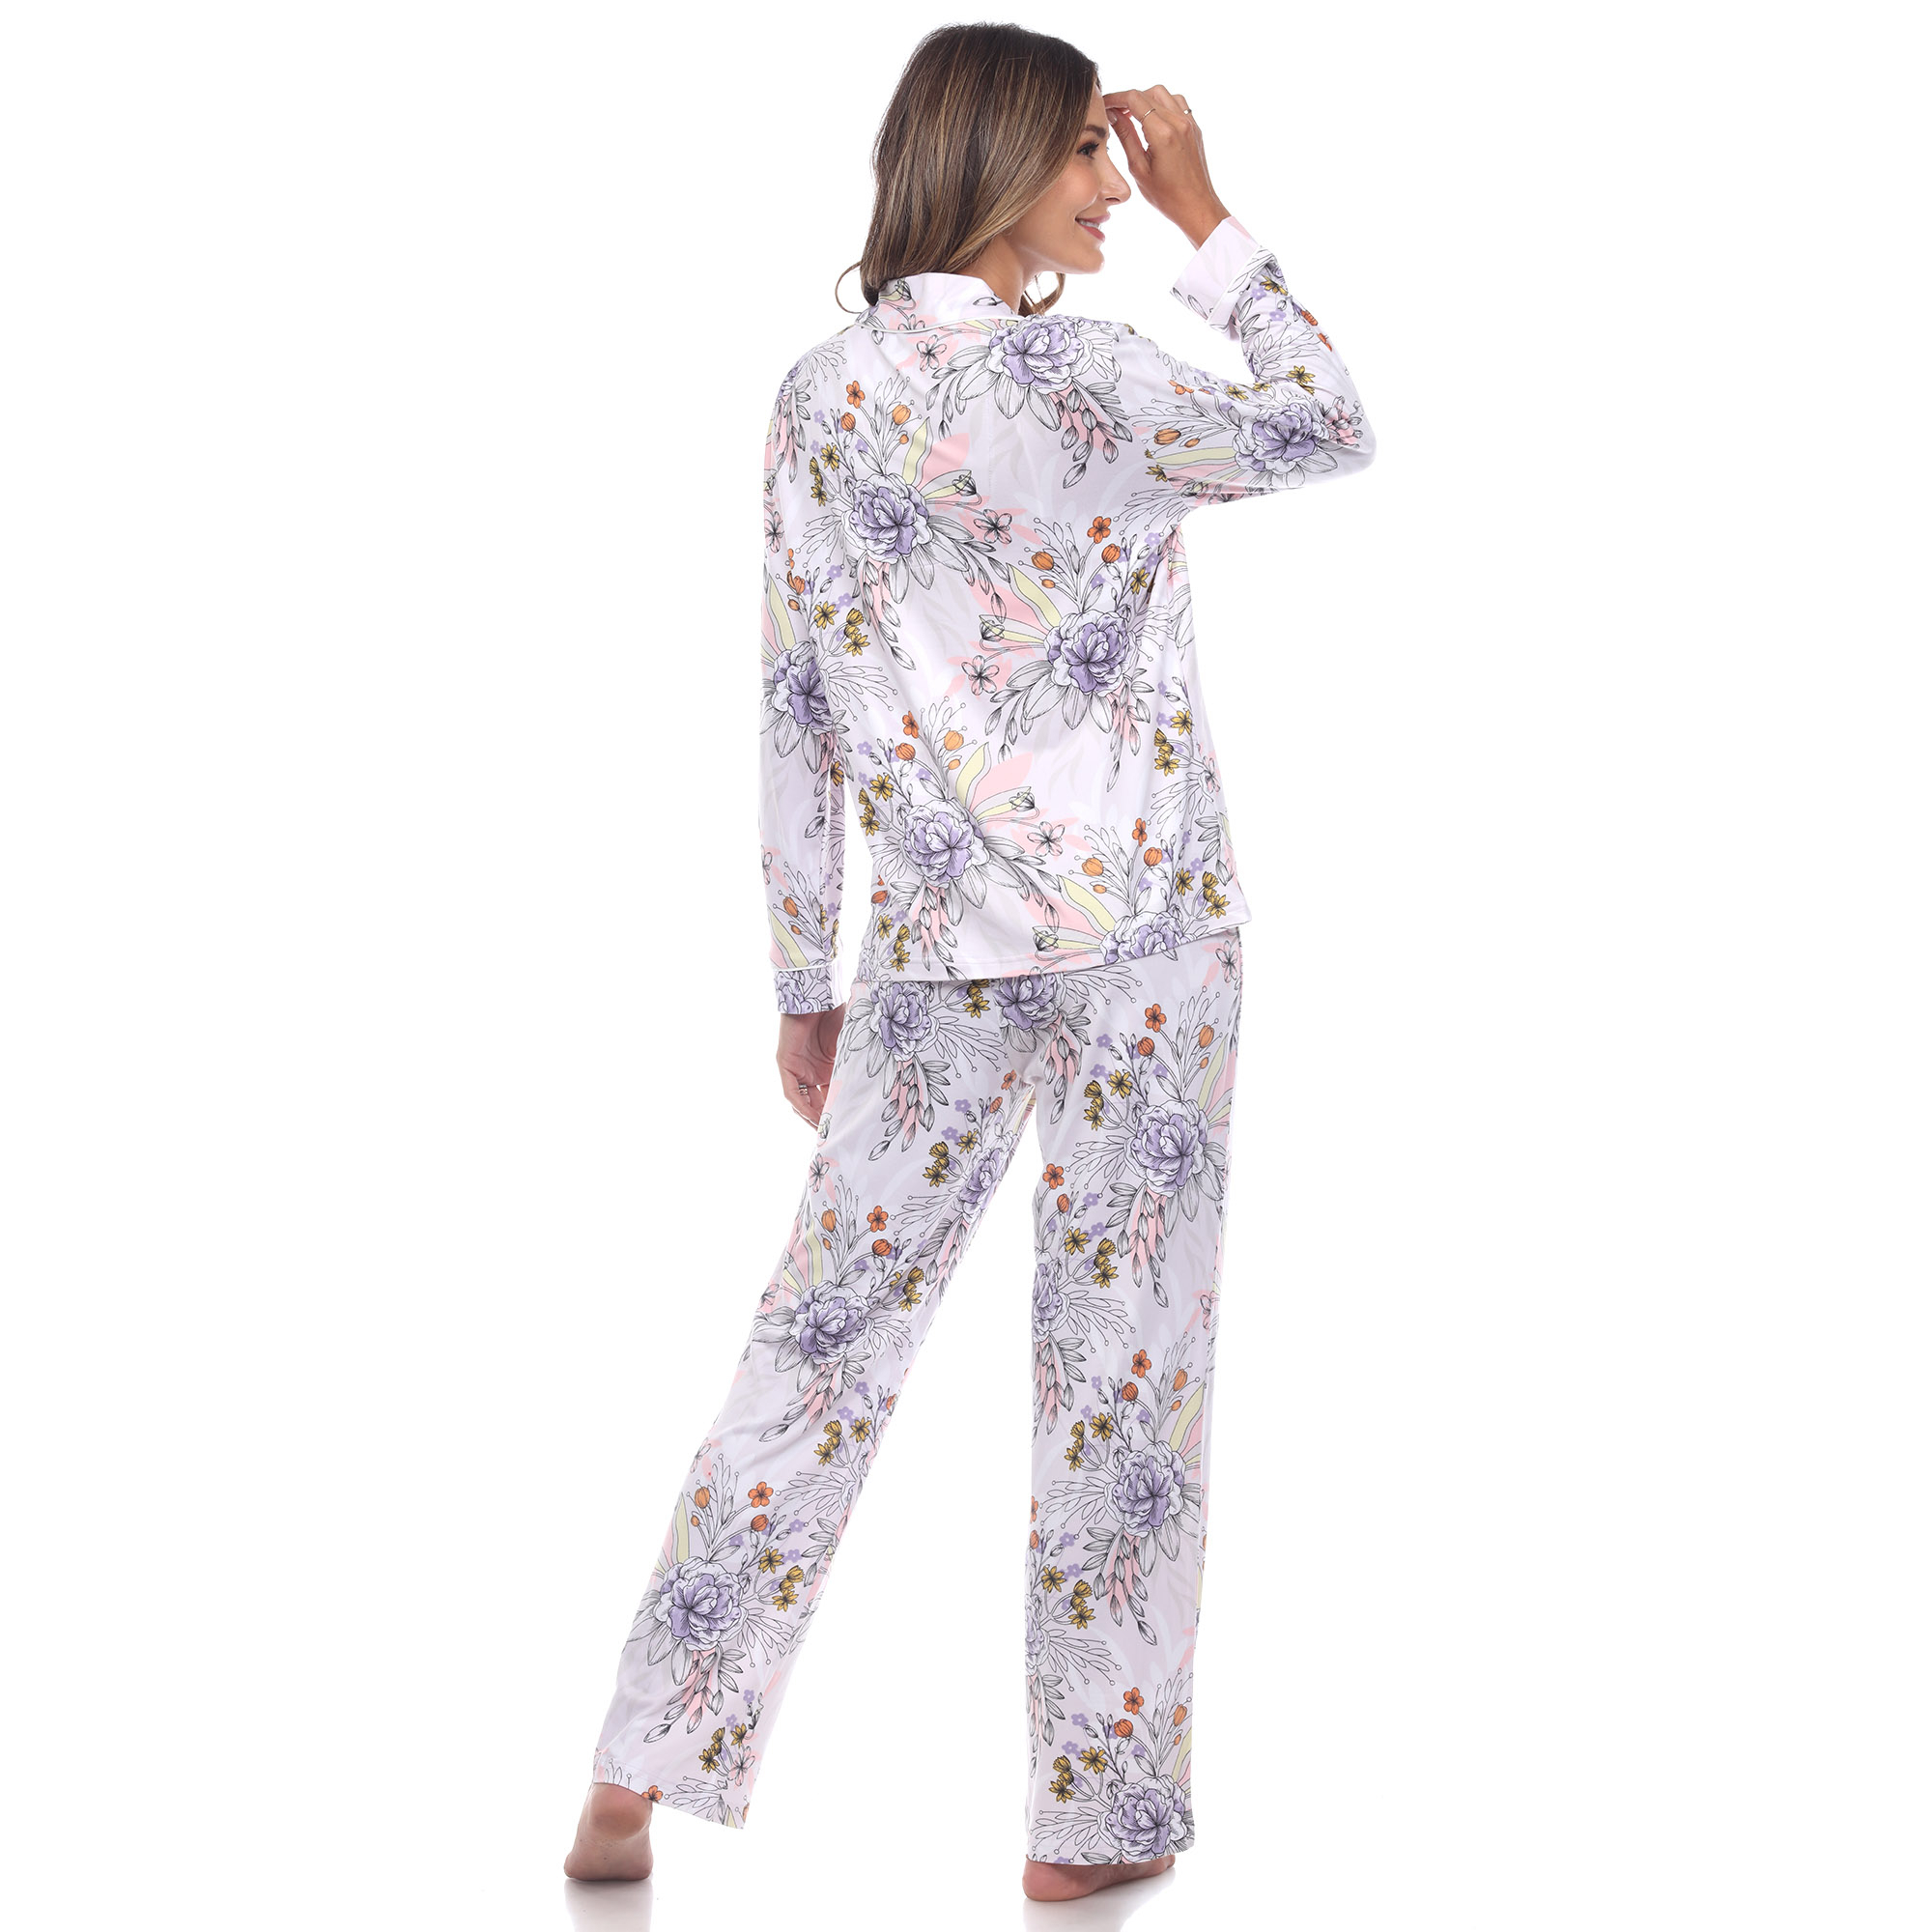 White Mark Women's Long Sleeve Floral Pajama Set - Red, 3X